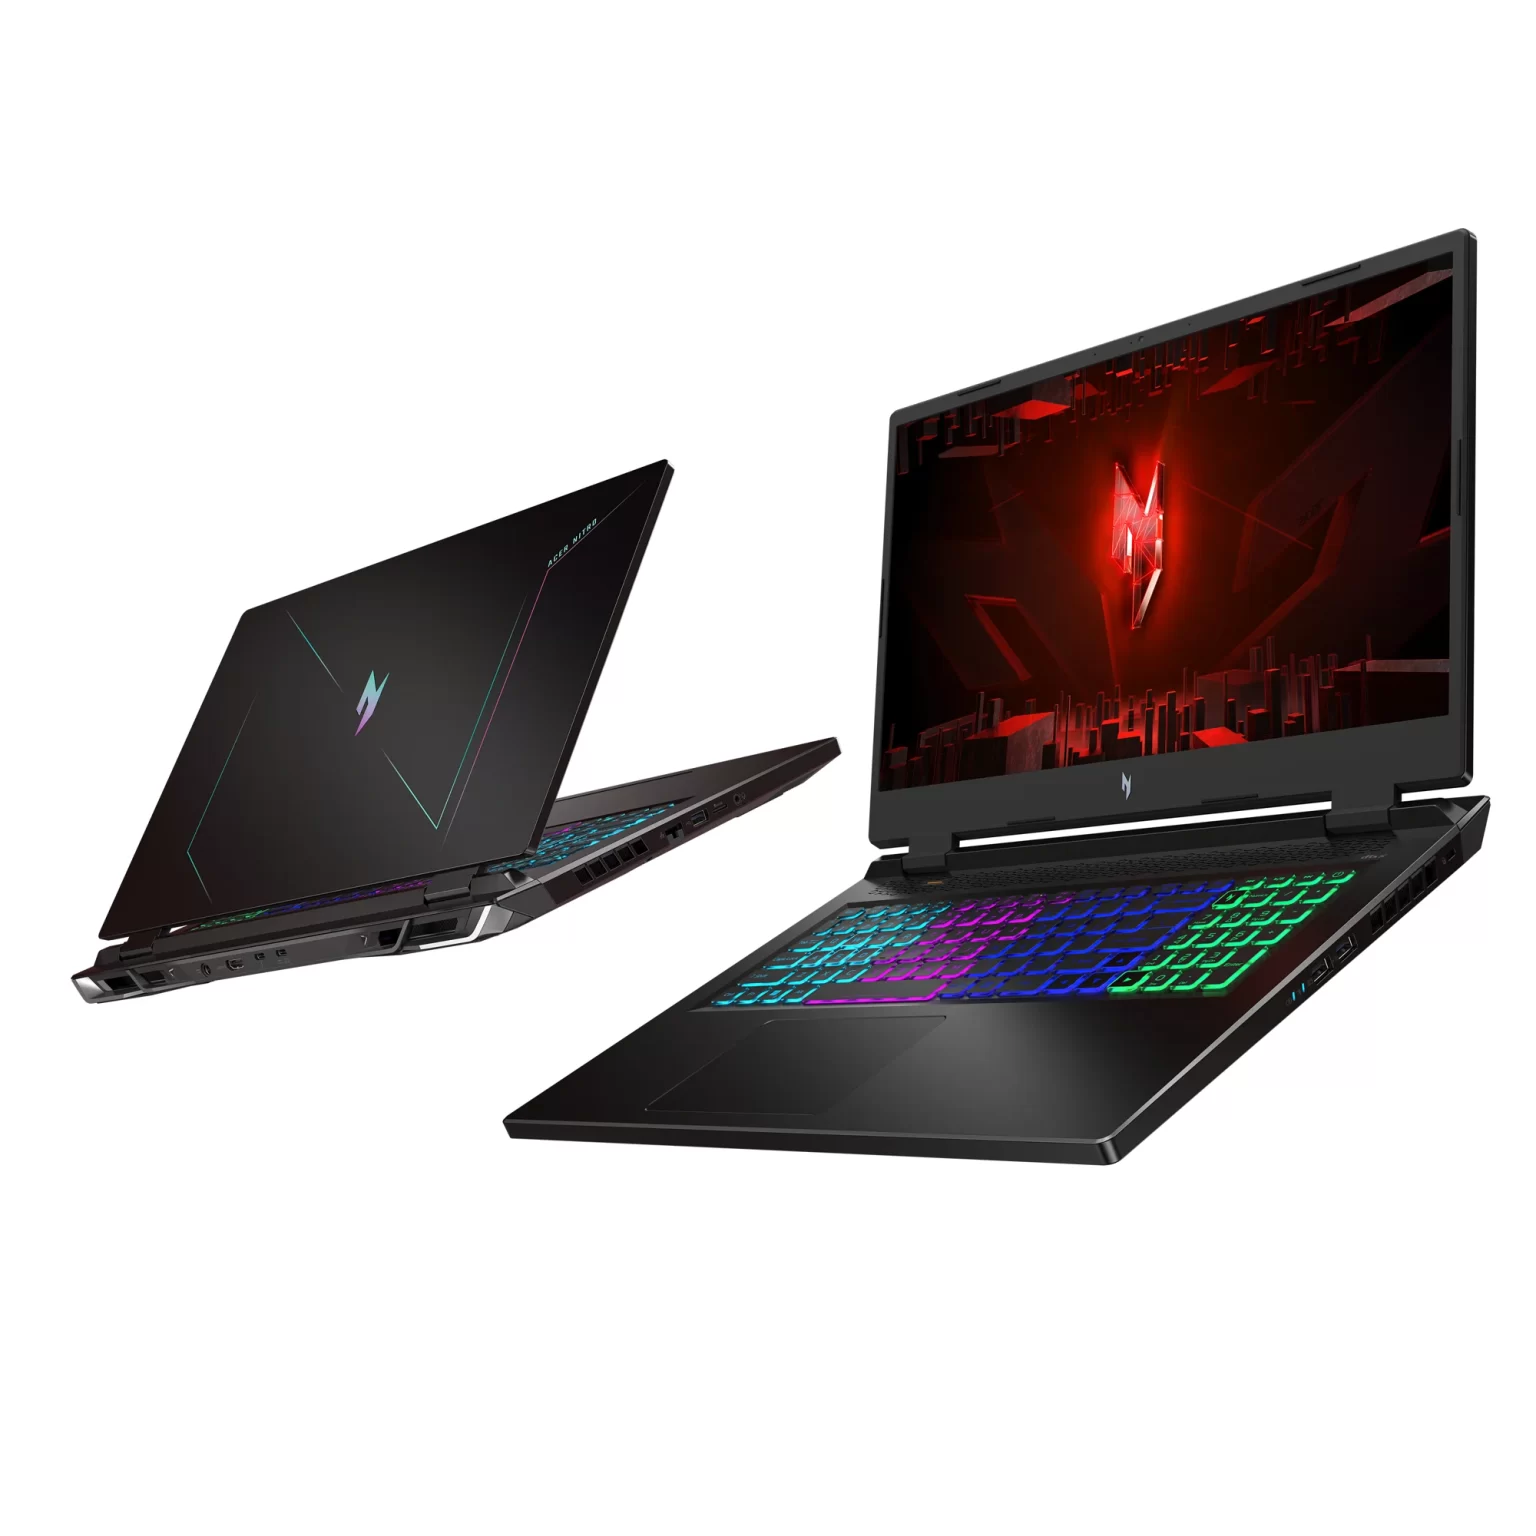 Nitro 17 Intel AN17 51 05 1536x1536 - Acer launched new Nitro laptops with 13th Gen Intel CPUs & RTX 40 series GPUs